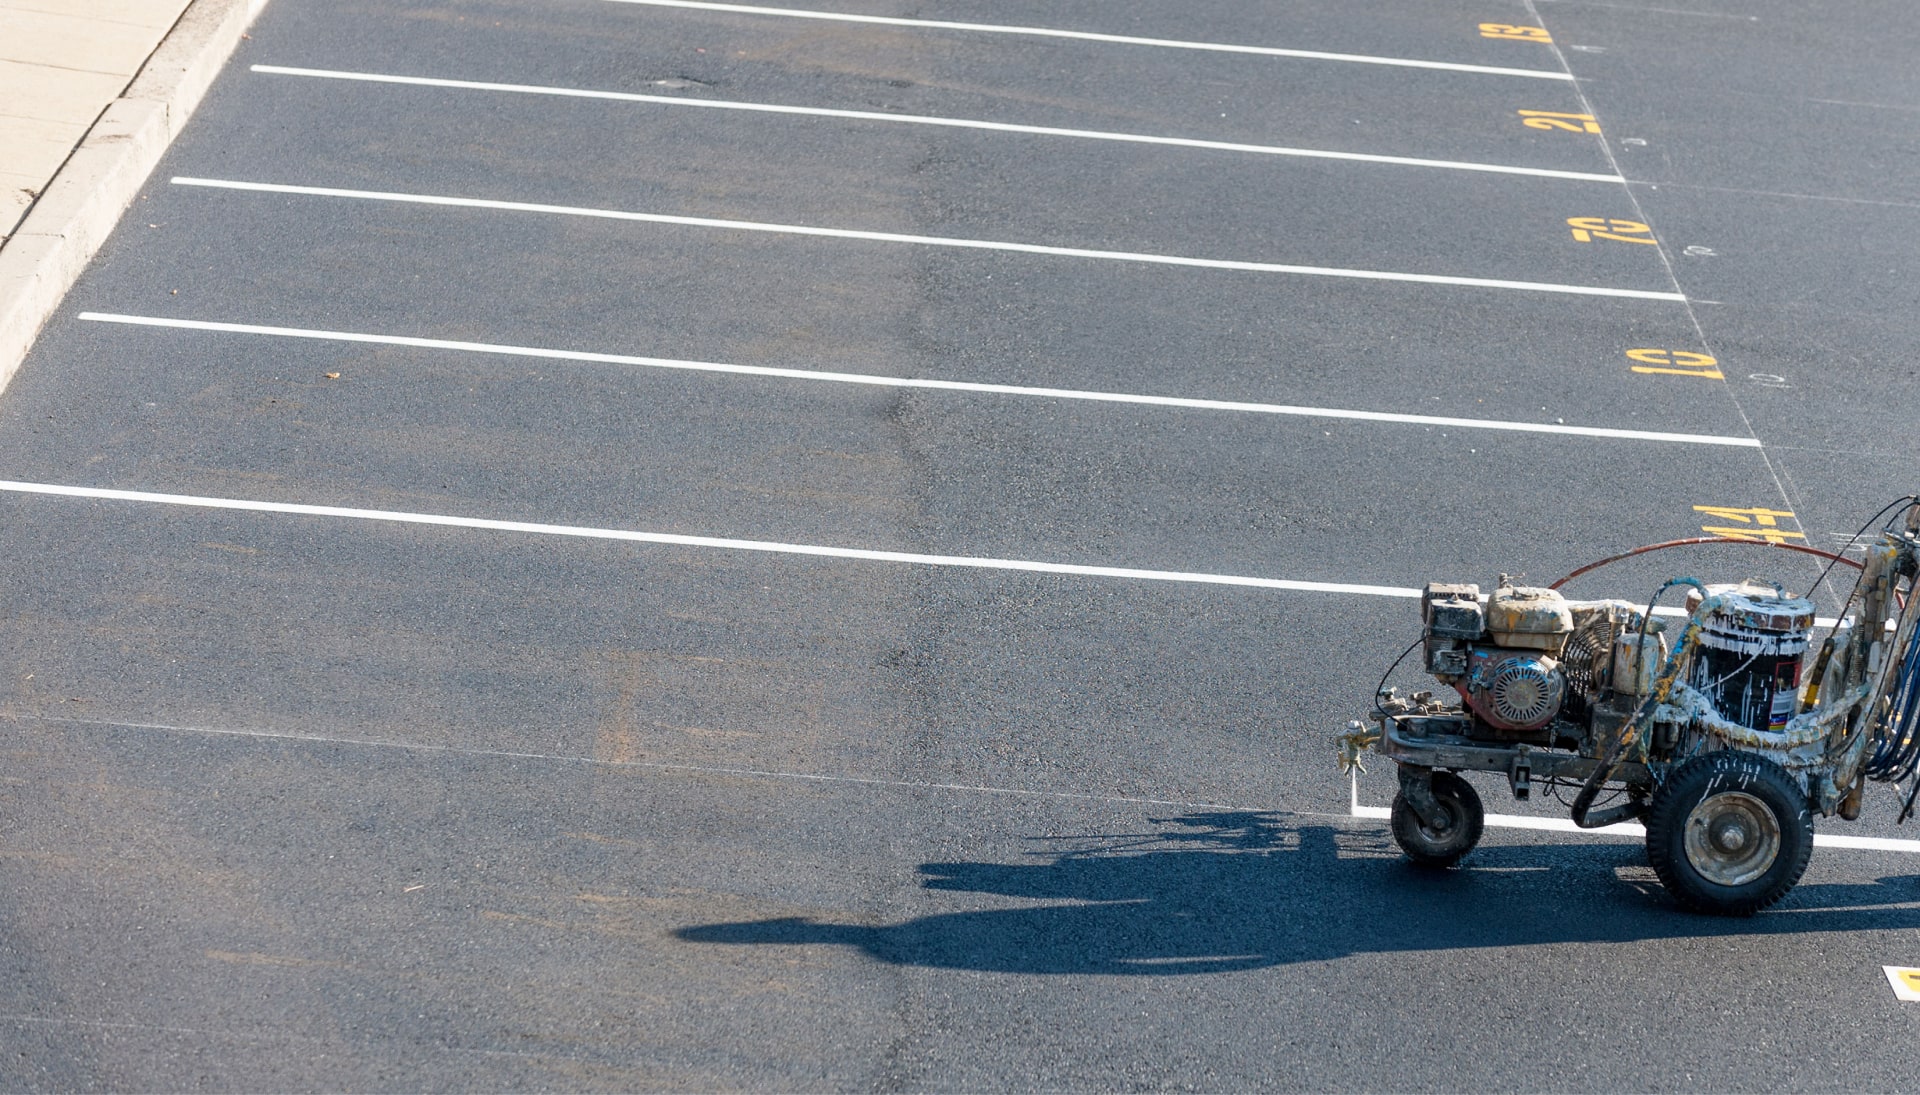 A professional parking lot striping machine creates lines and space numbers in a parking lot in Saint Paul, MN.